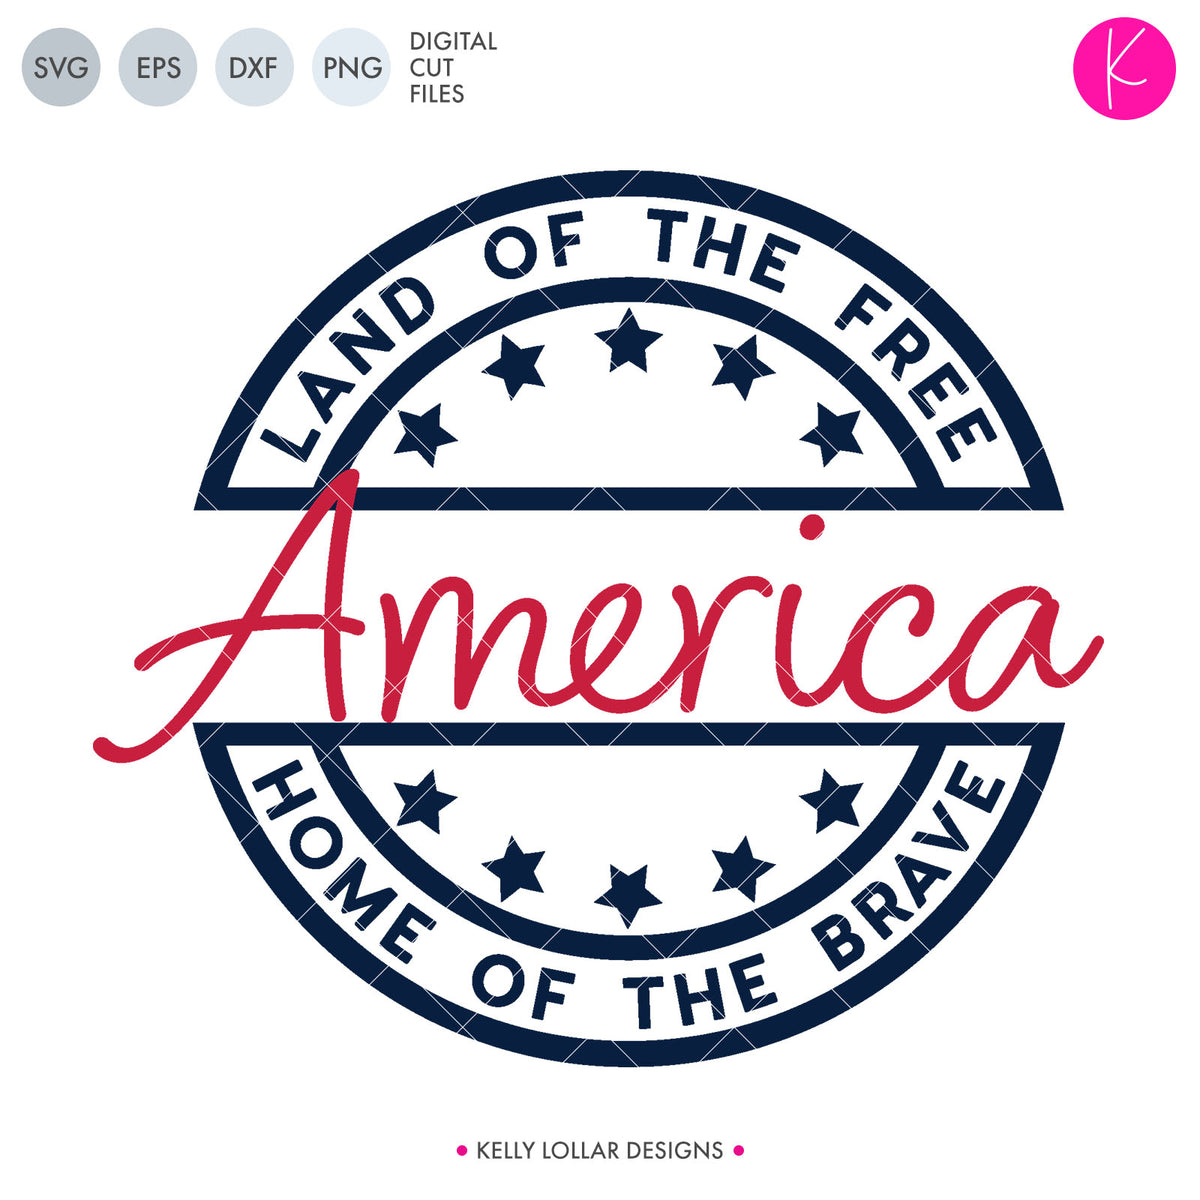 America: Land of the Free Home of the Brave | SVG DXF EPS PNG Cut Files